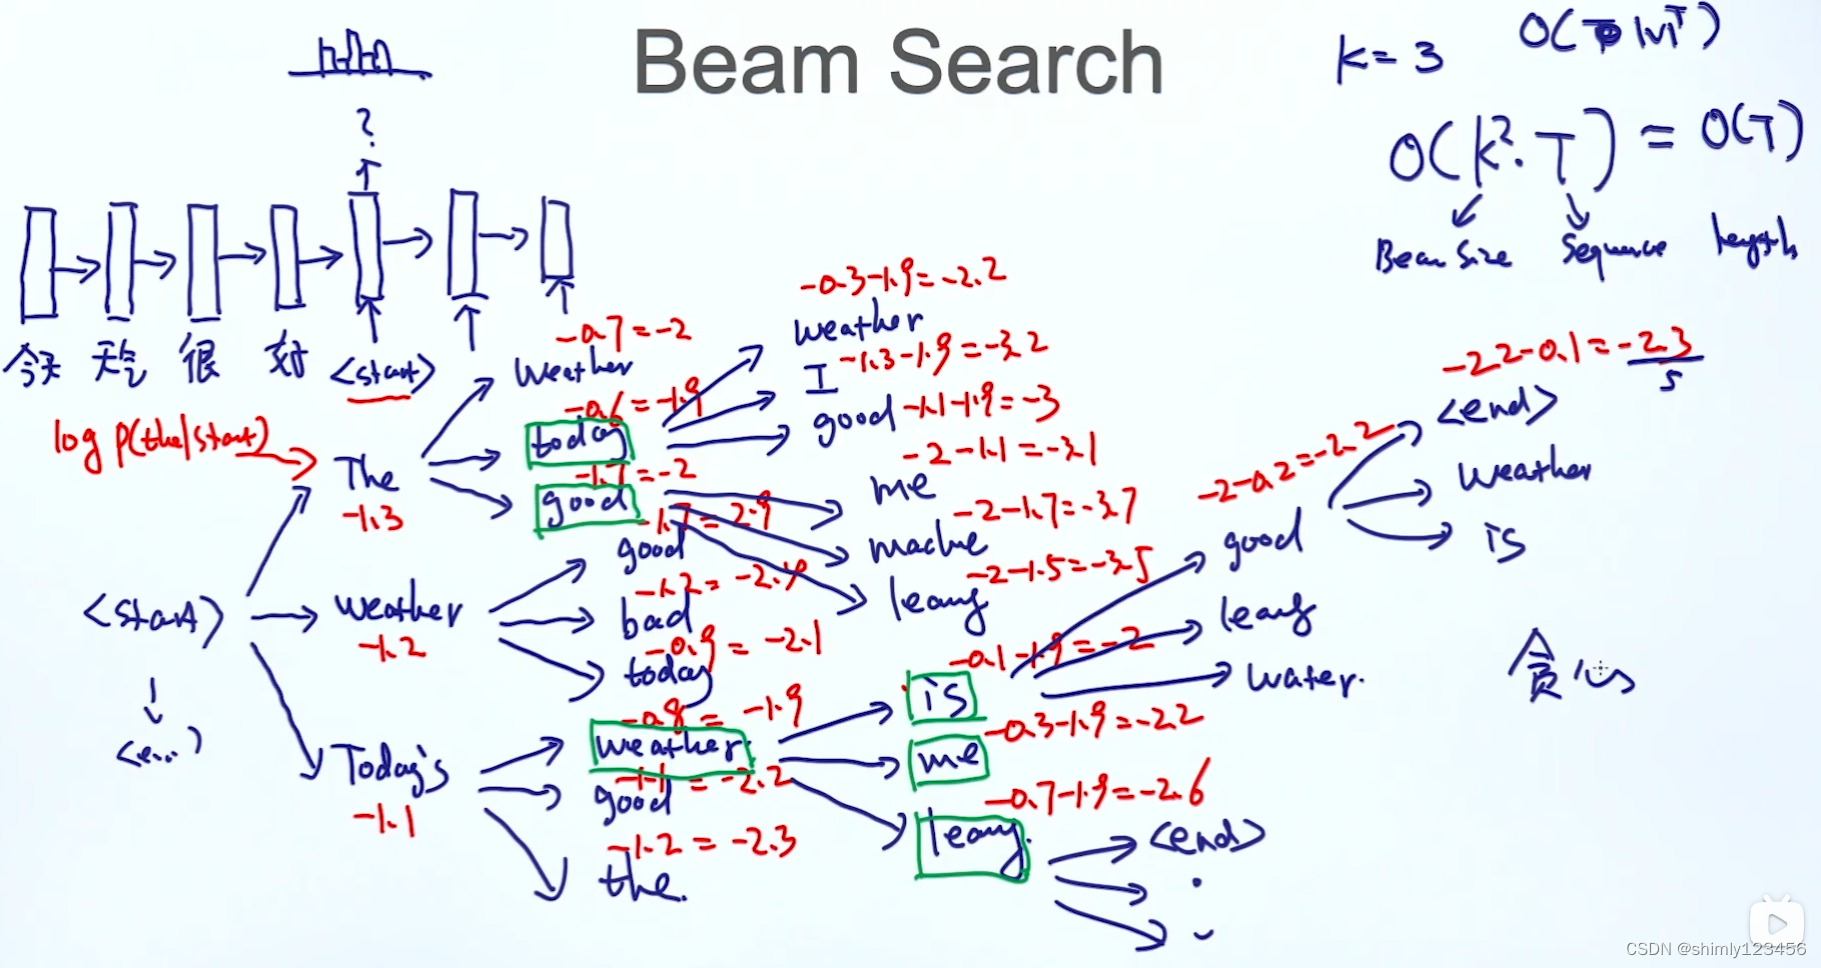 (done) Beam search